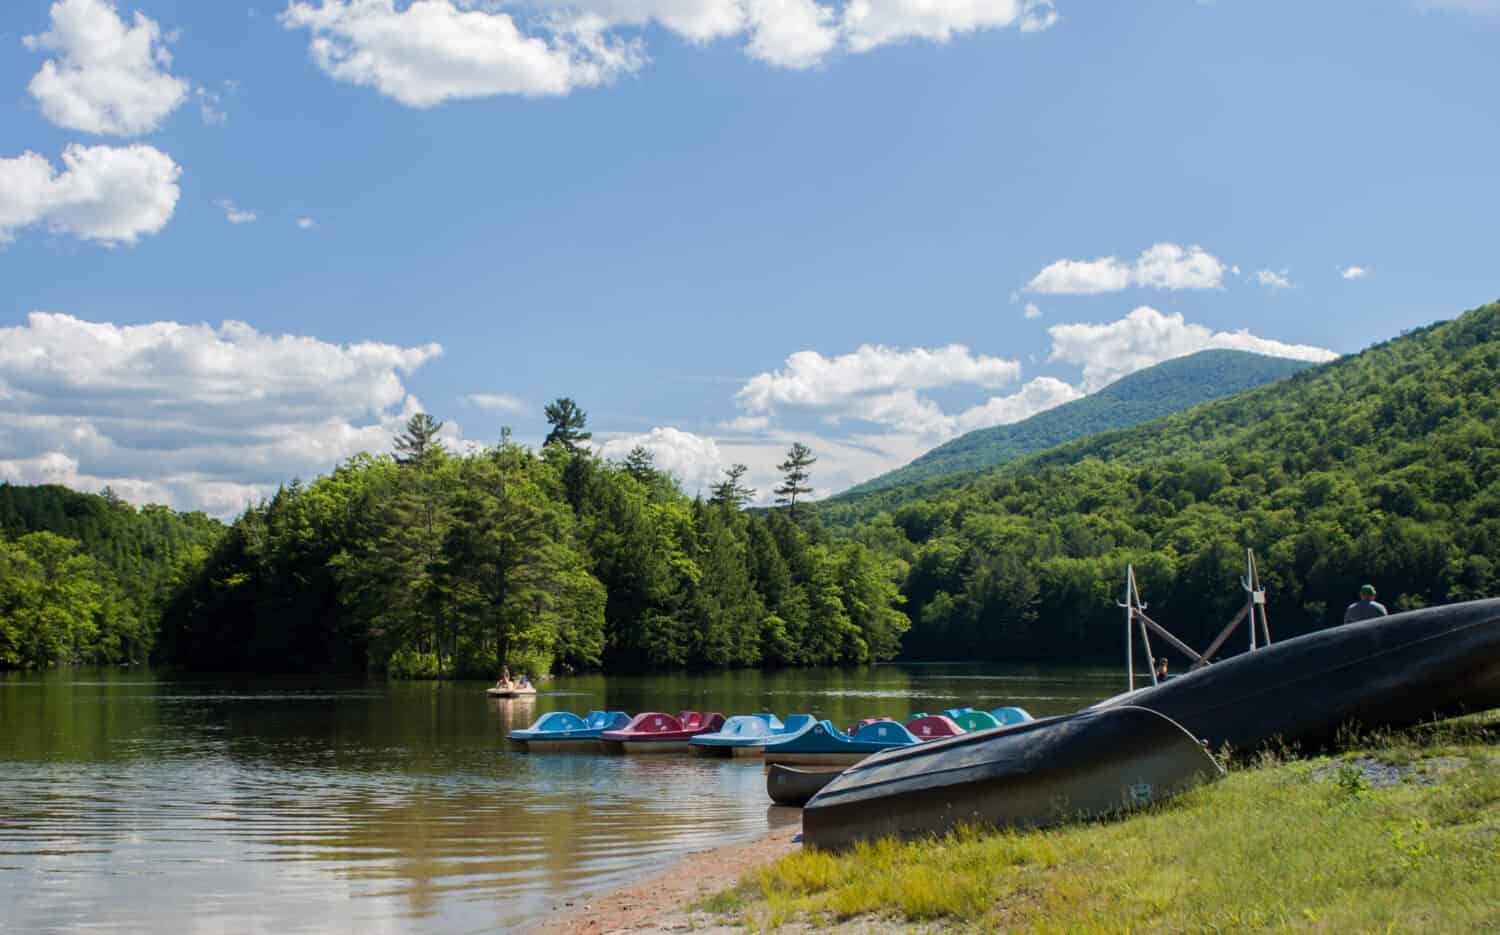 A row of paddle boats and canoes near the shore on Emerald Lake at Emerald Lake State Park in East Dorset, Vermont. The lake is surrounded by green trees and the sky is clear blue with a few clouds.